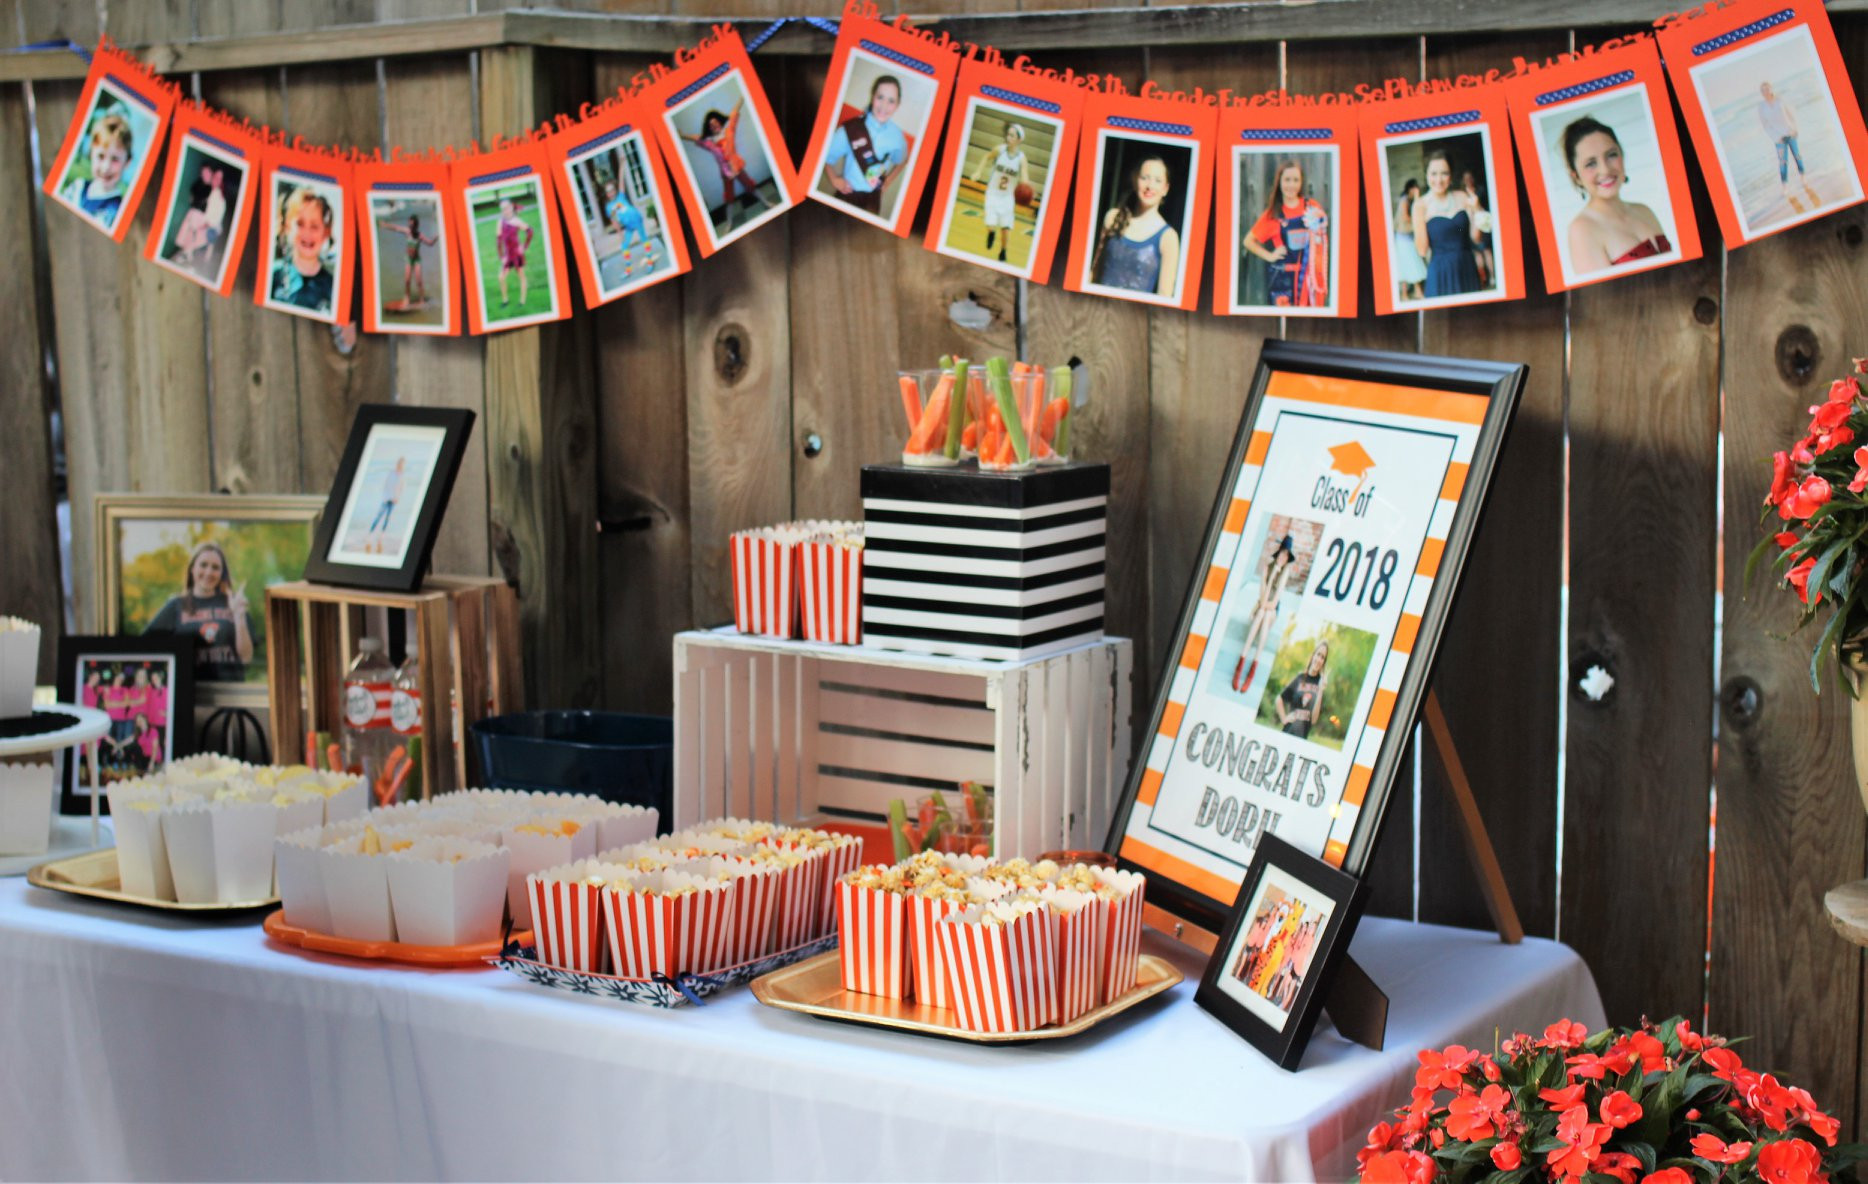 Party Ideas For High School Graduation
 Graduation Party Ideas How to Celebrate Your Senior s Big Day